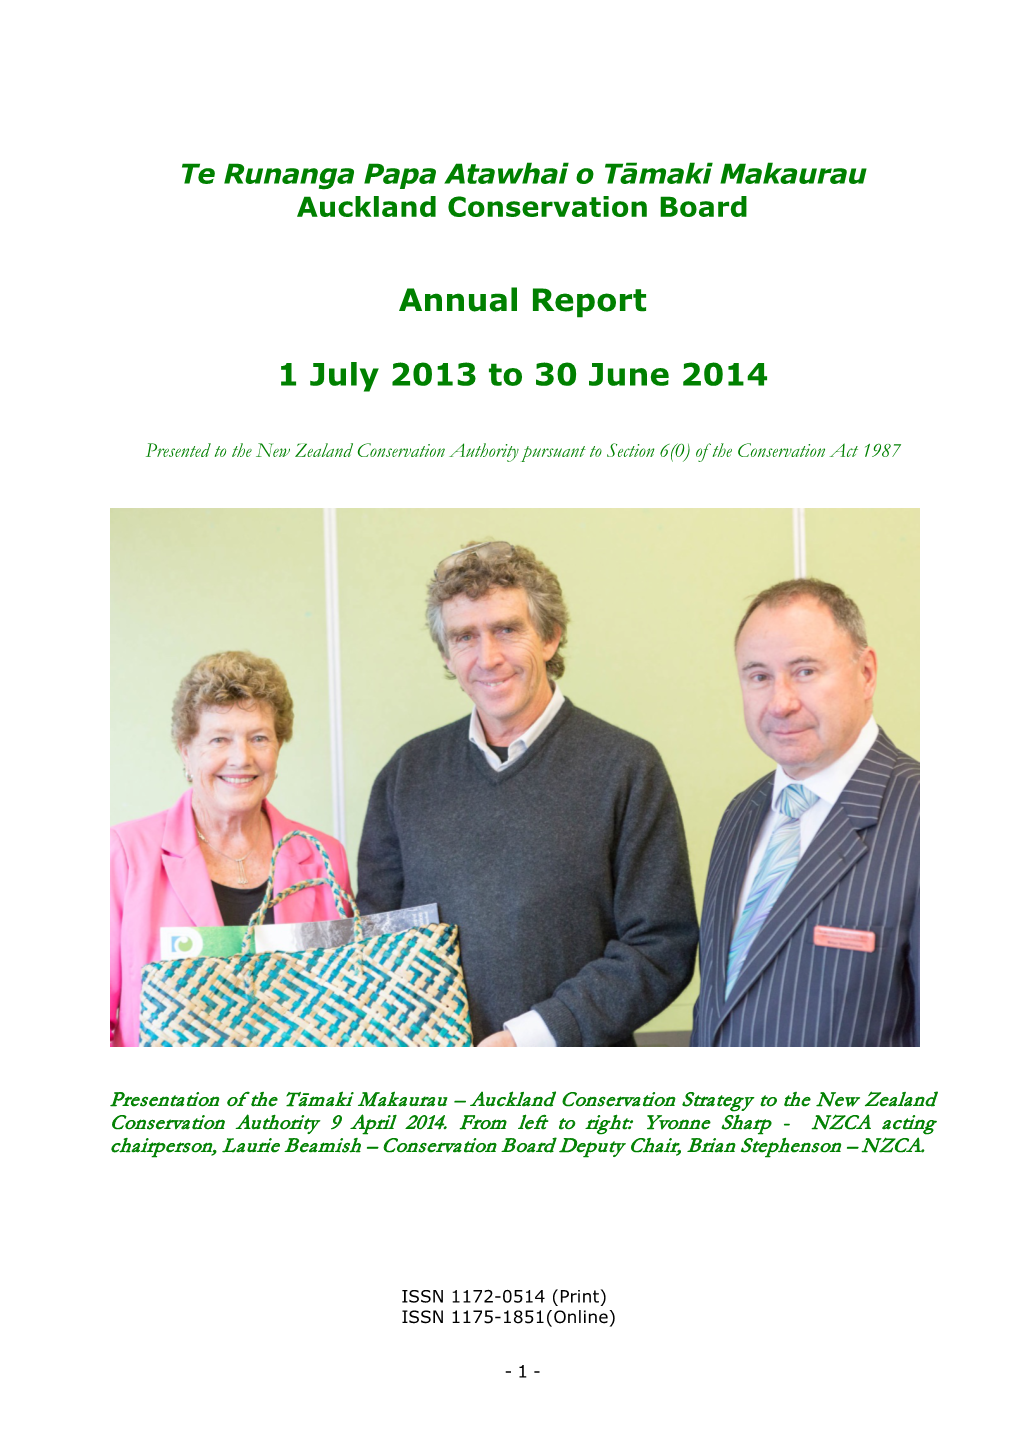 Auckland Conservation Board Annual Report 2013-2014